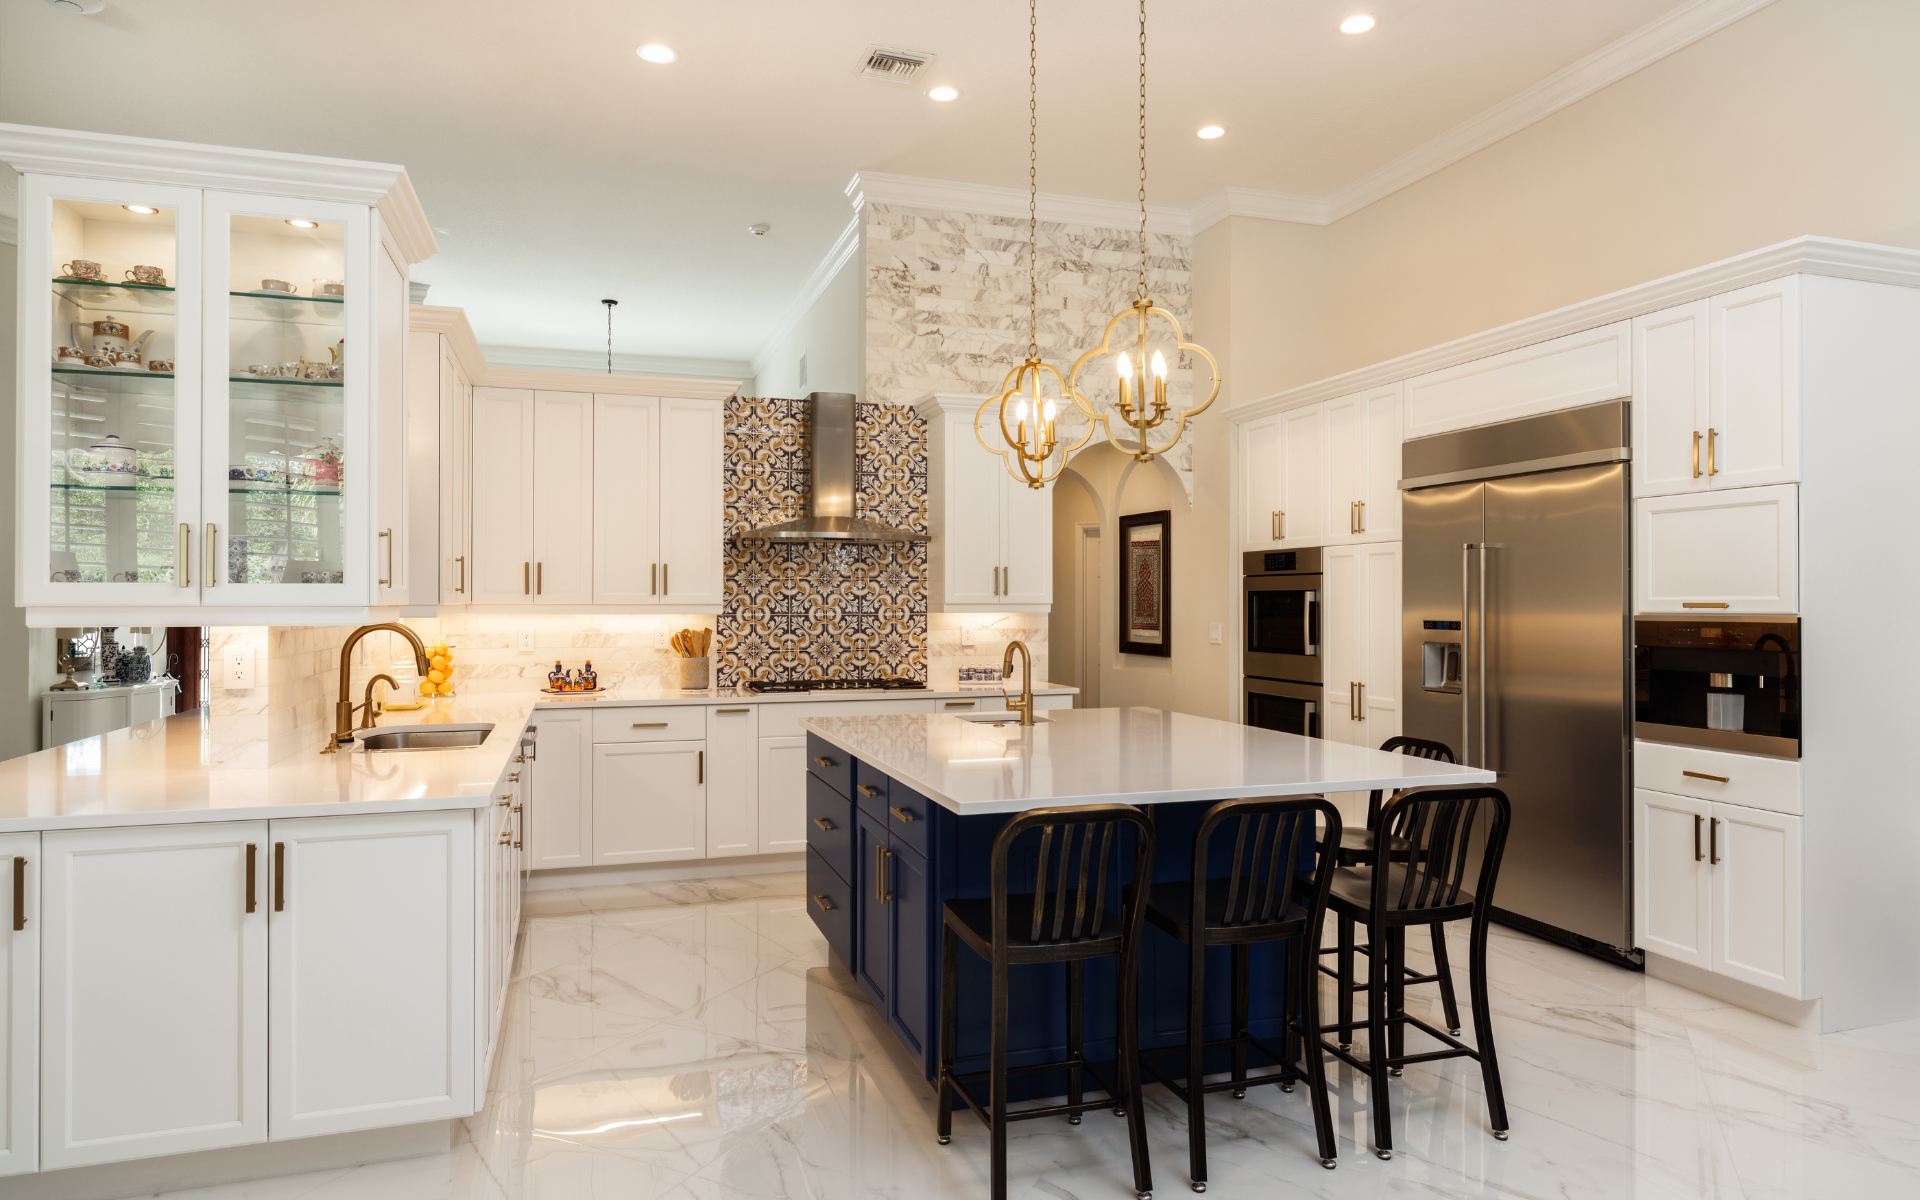 Modern, luxurious U-shape kitchen with white and navy shaker cabinets